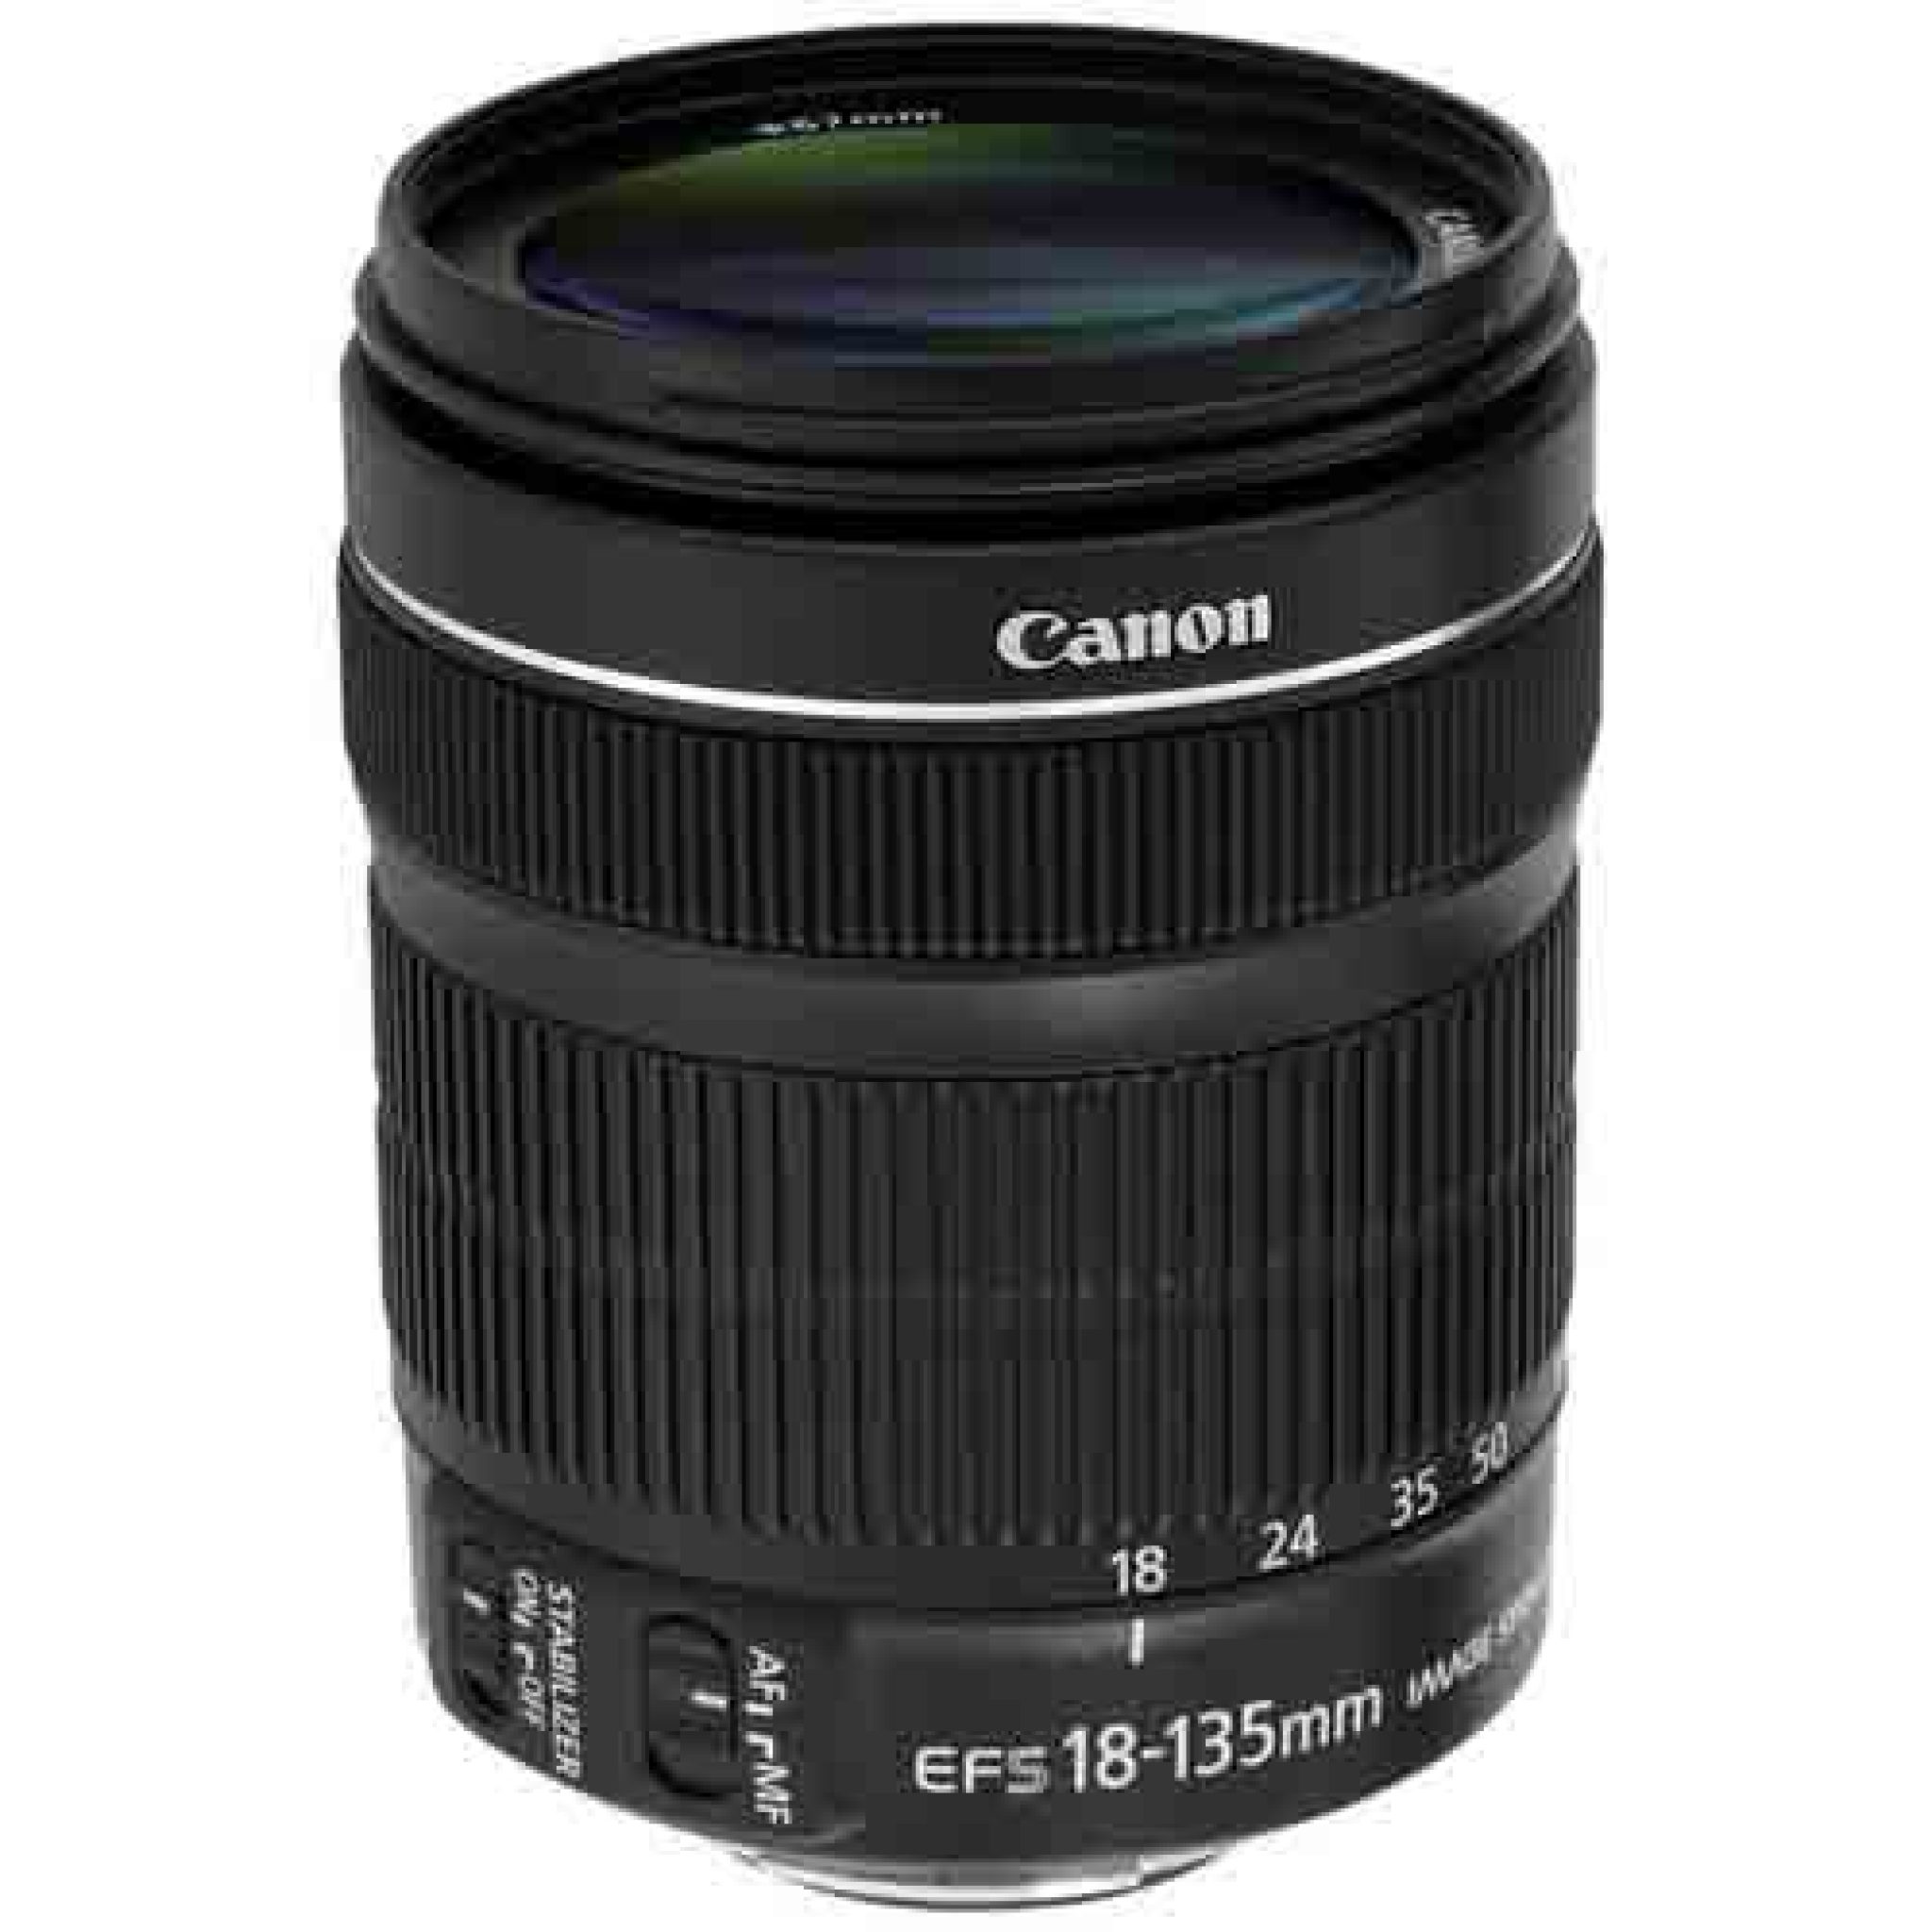 Canon EF-S 18-135mm f/3.5-5.6 IS STM Lens Price in Pakistan 2020